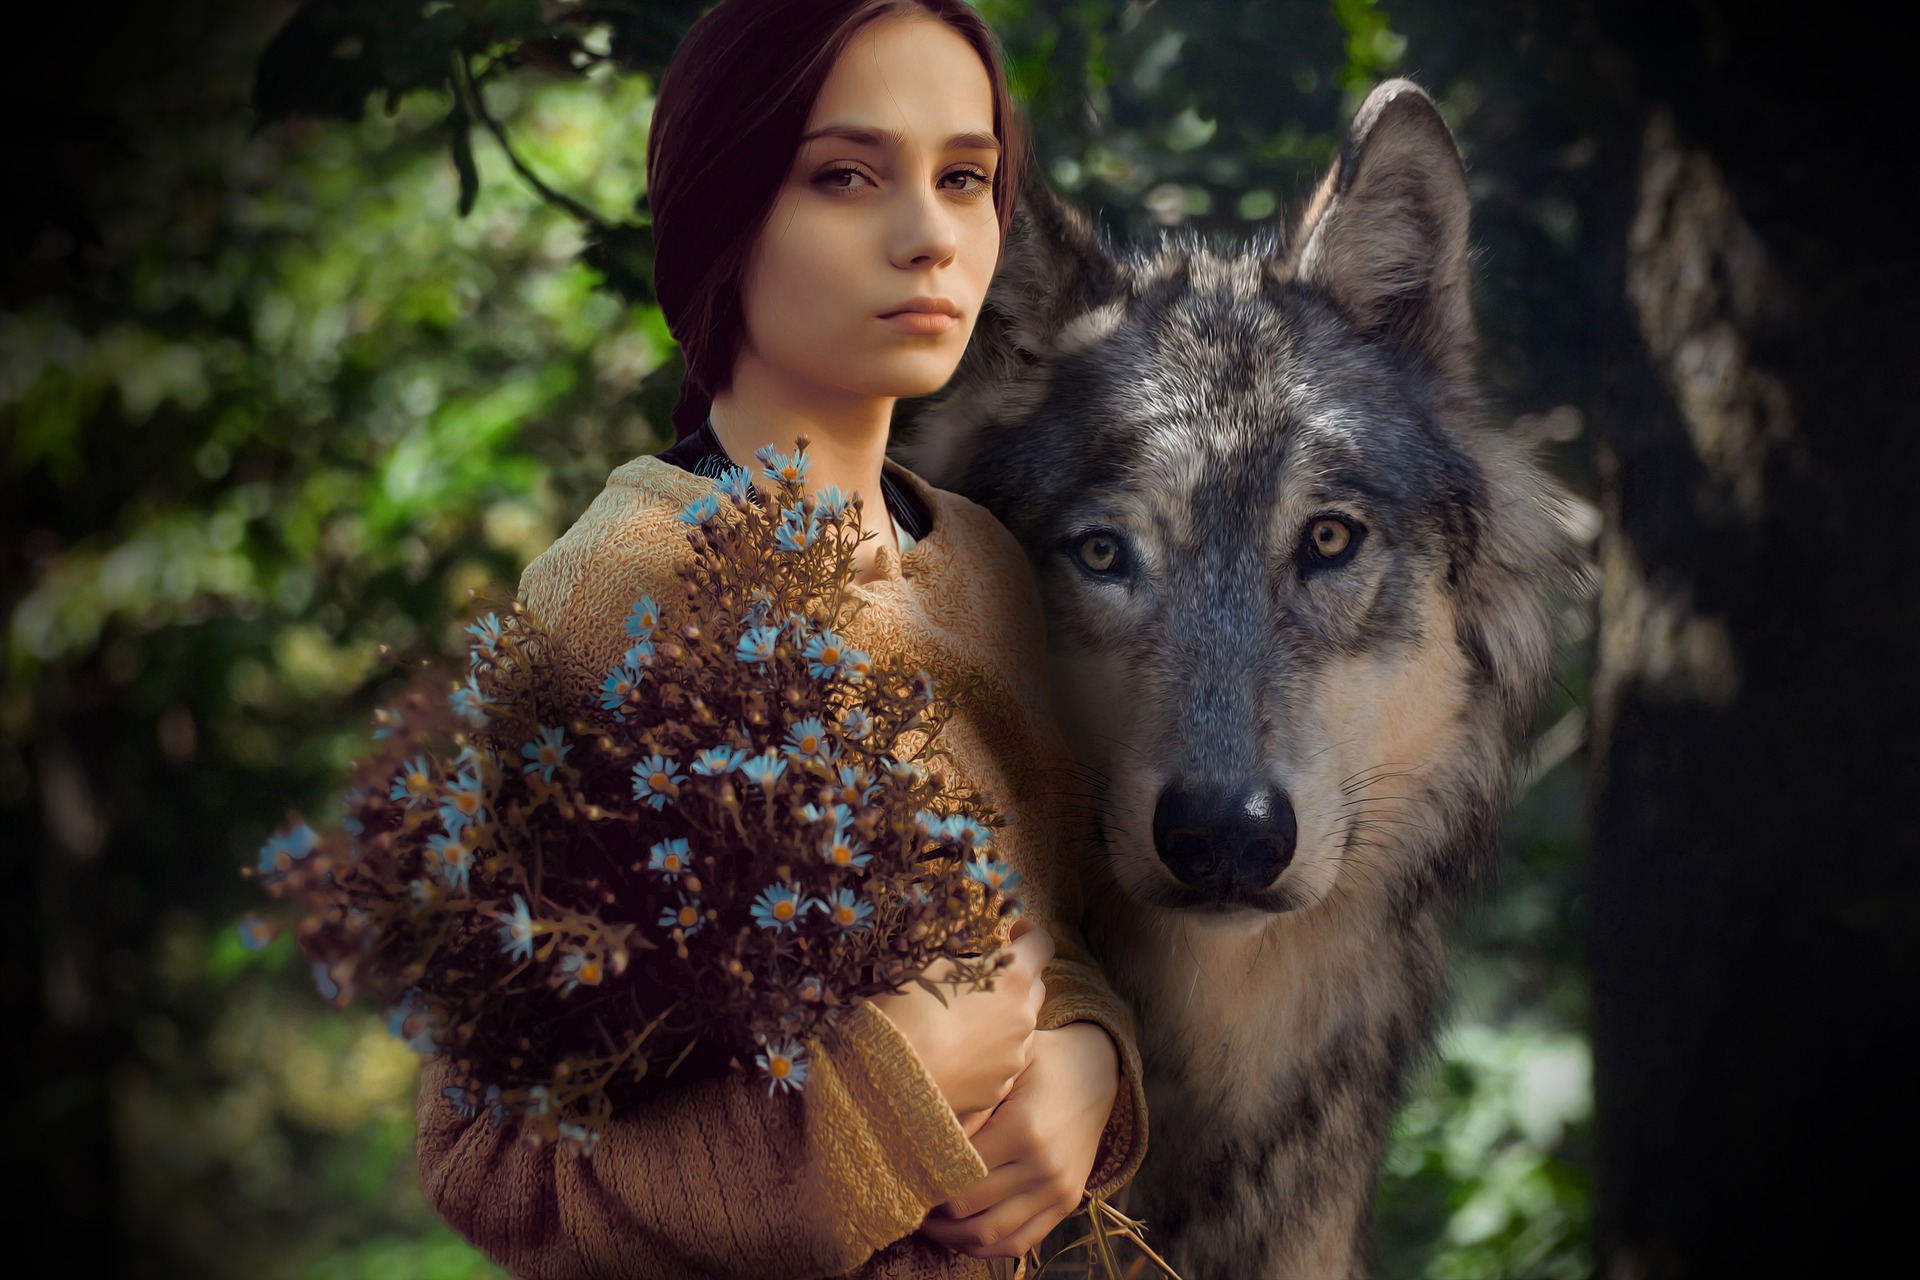 Adult romance fantasy: Girl holding flowers with a werewolf by her side